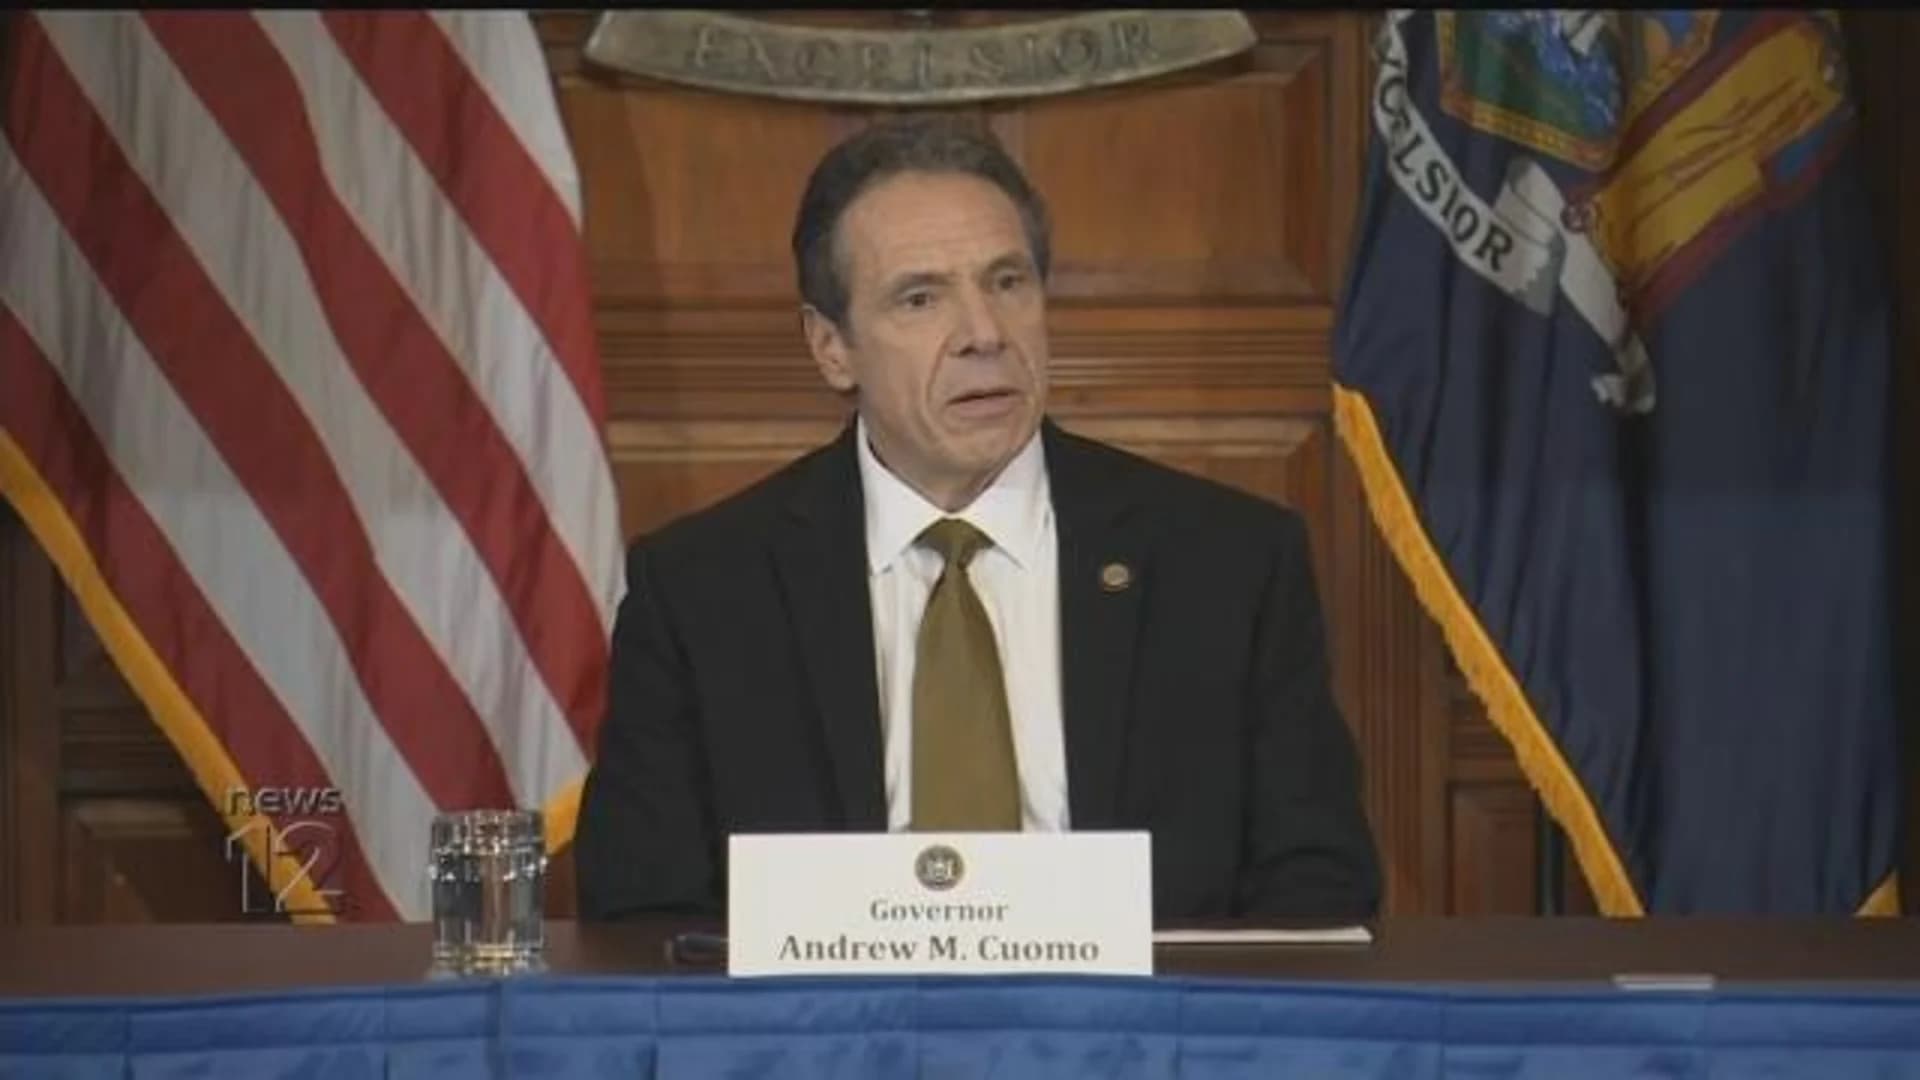 Gov. Cuomo bans gatherings of 500 people or more due to coronavirus